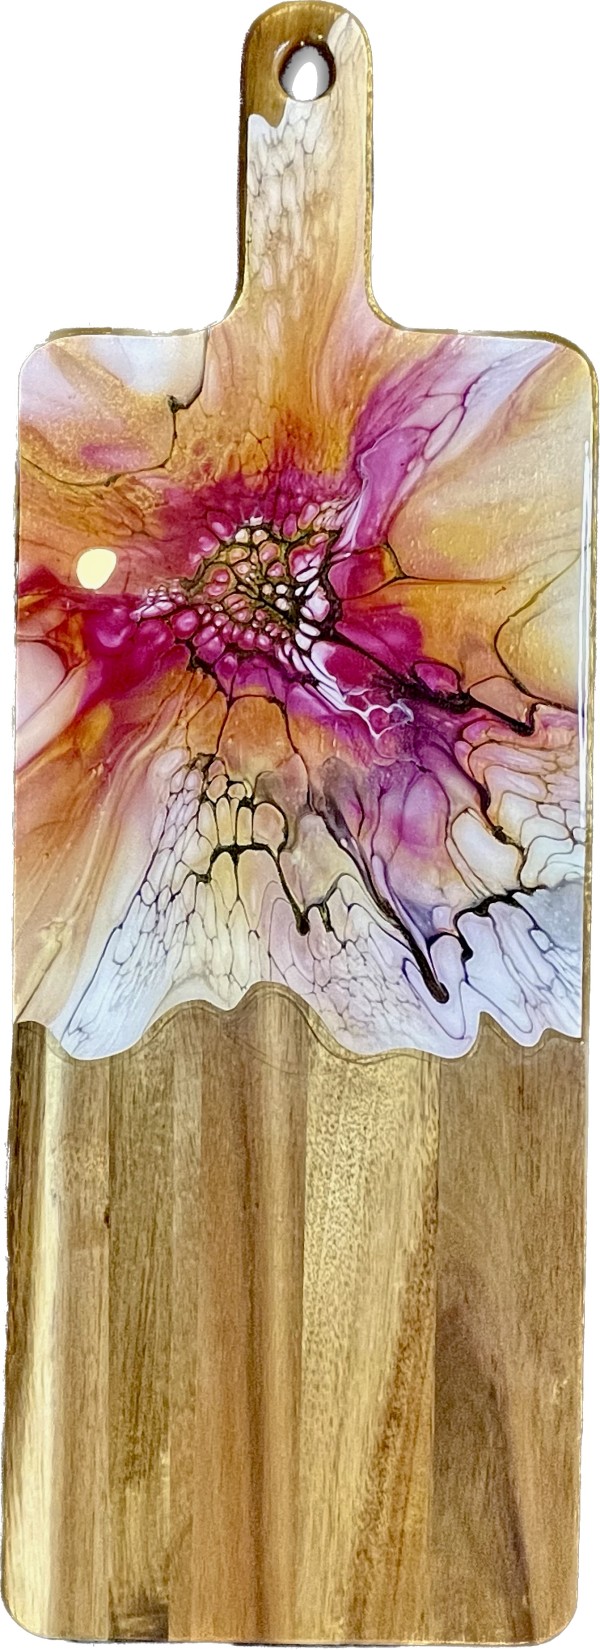 Cranberry Bliss 21” Charcuterie Board by Pourin’ My Heart Out - Fluid Art by Angela Lloyd